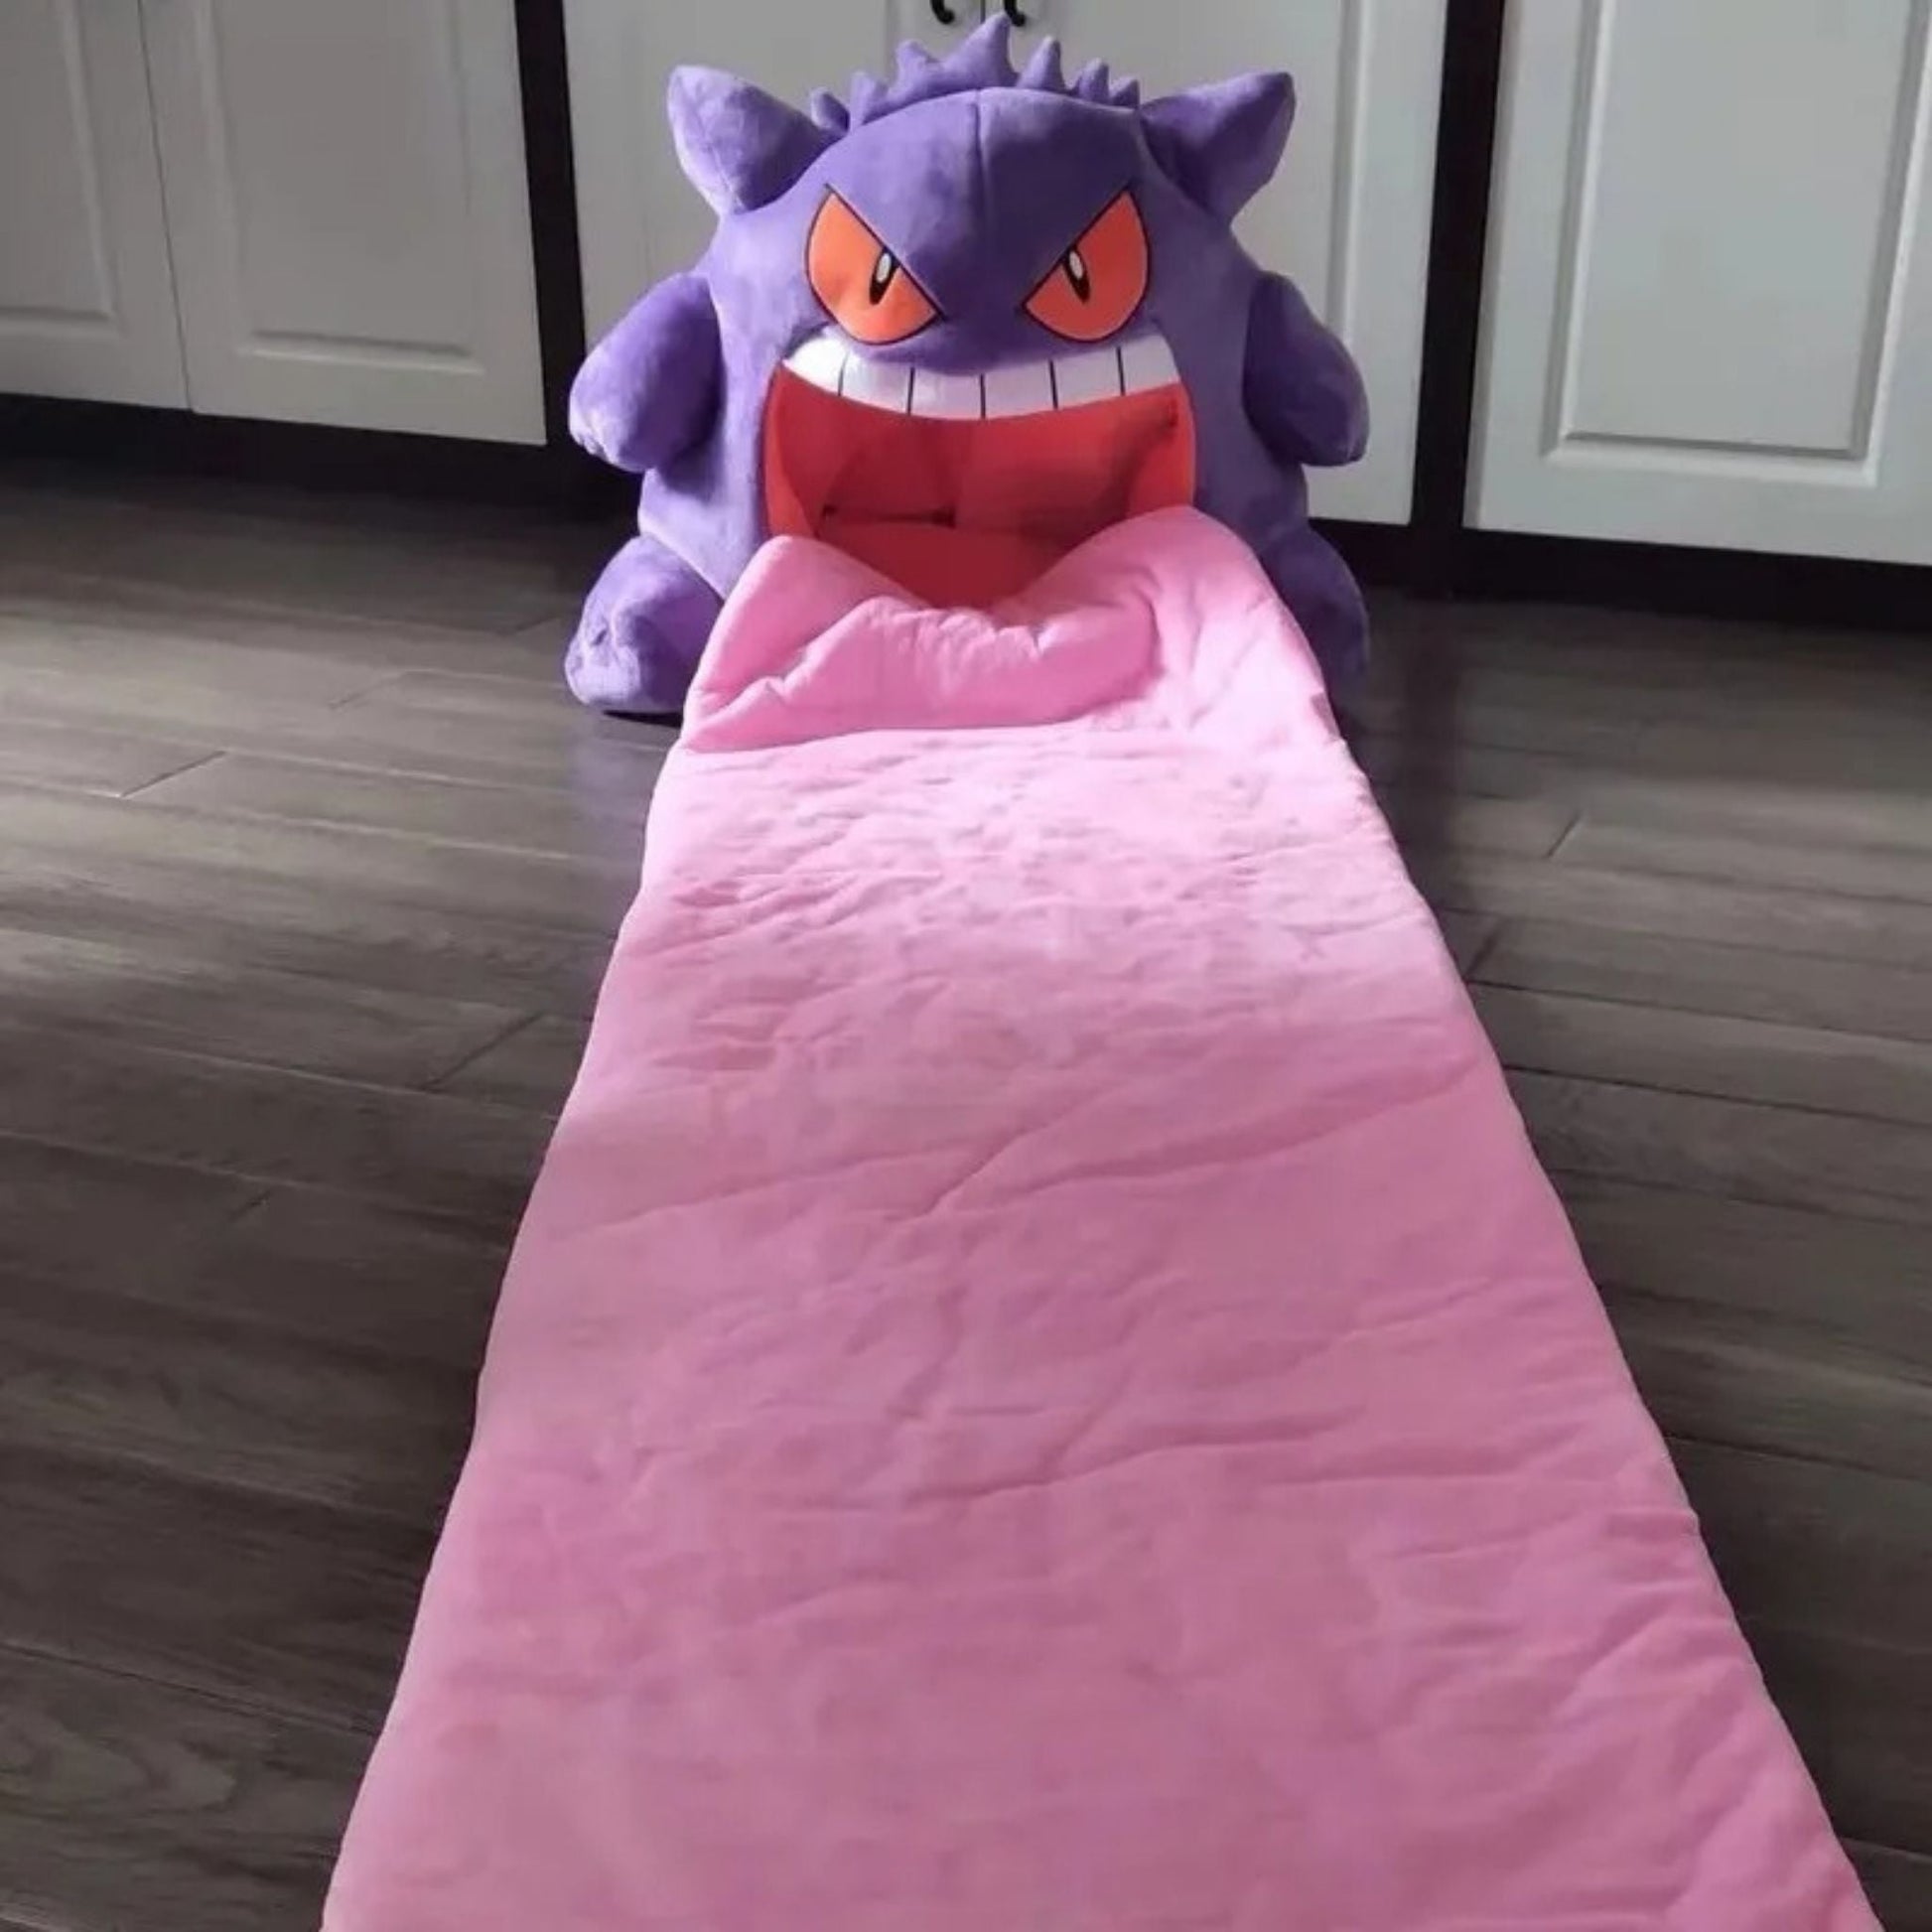 Tongue Laid Out - Gengar Tongue Pillow Blanket Sleeping Pod For Afternoon Naps. Portable design for travel, work and on the go napping. Perfect gift for Pokémon fans.